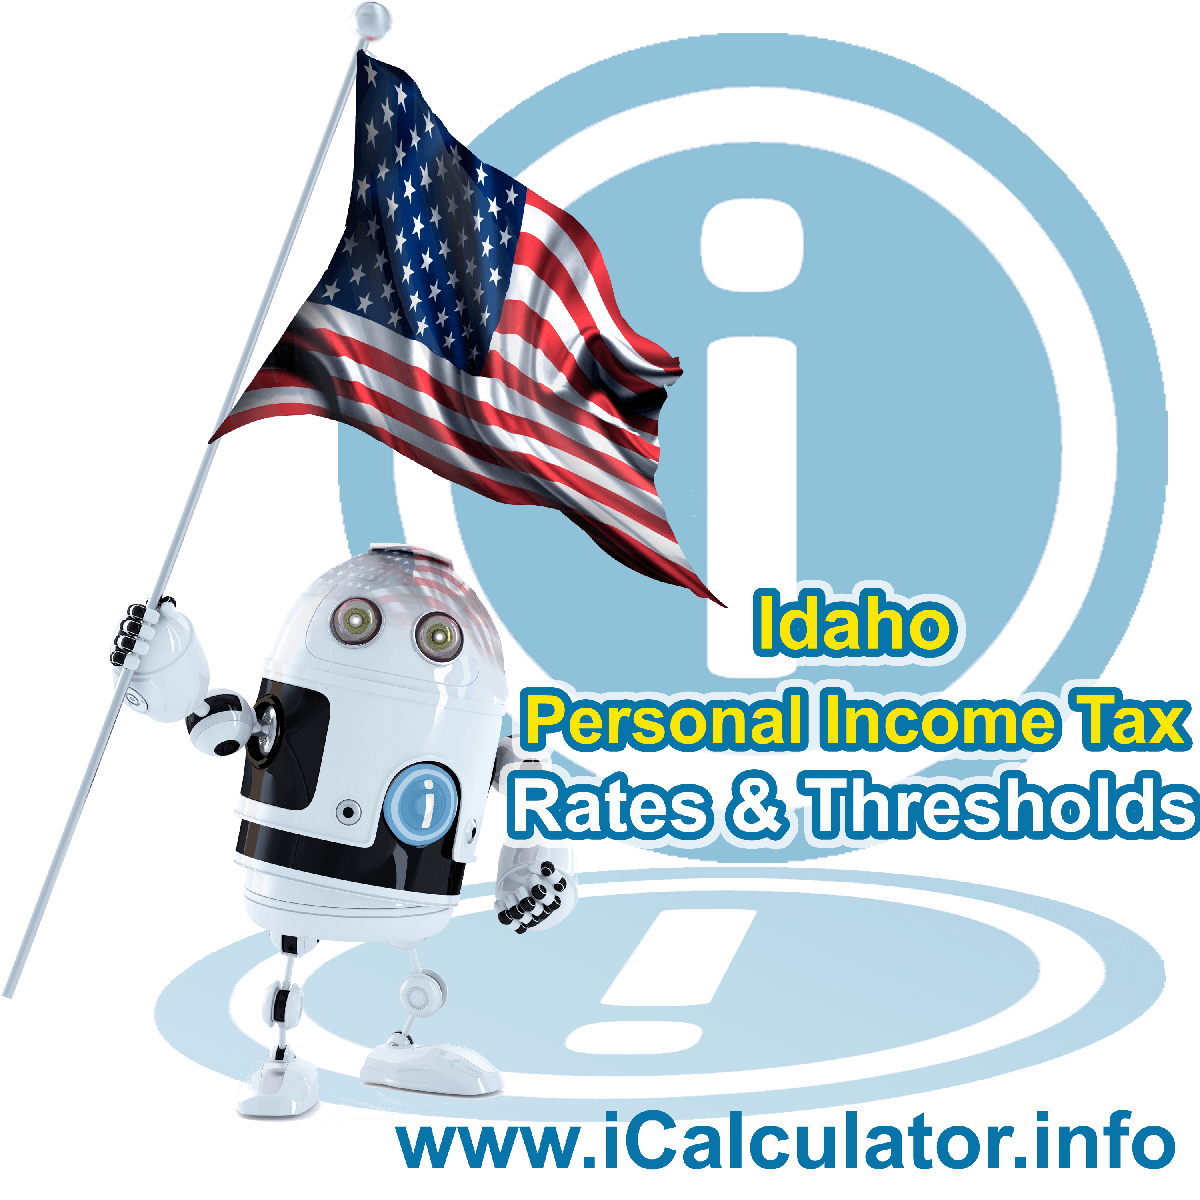 Idaho State Tax Tables 2014. This image displays details of the Idaho State Tax Tables for the 2014 tax return year which is provided in support of the 2014 US Tax Calculator